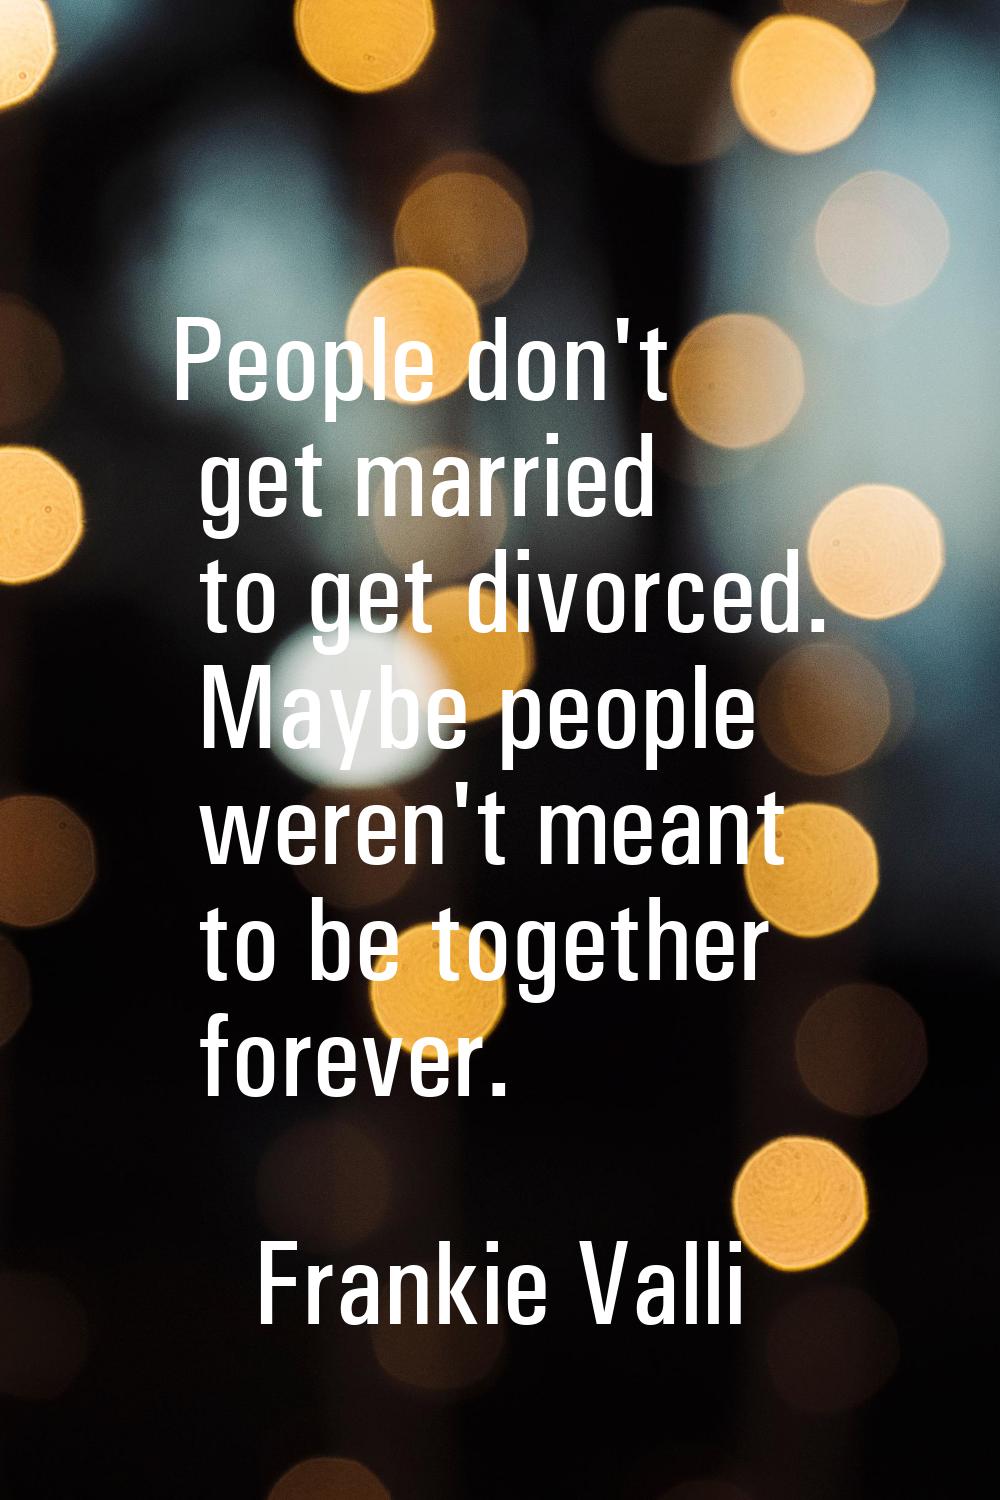 People don't get married to get divorced. Maybe people weren't meant to be together forever.